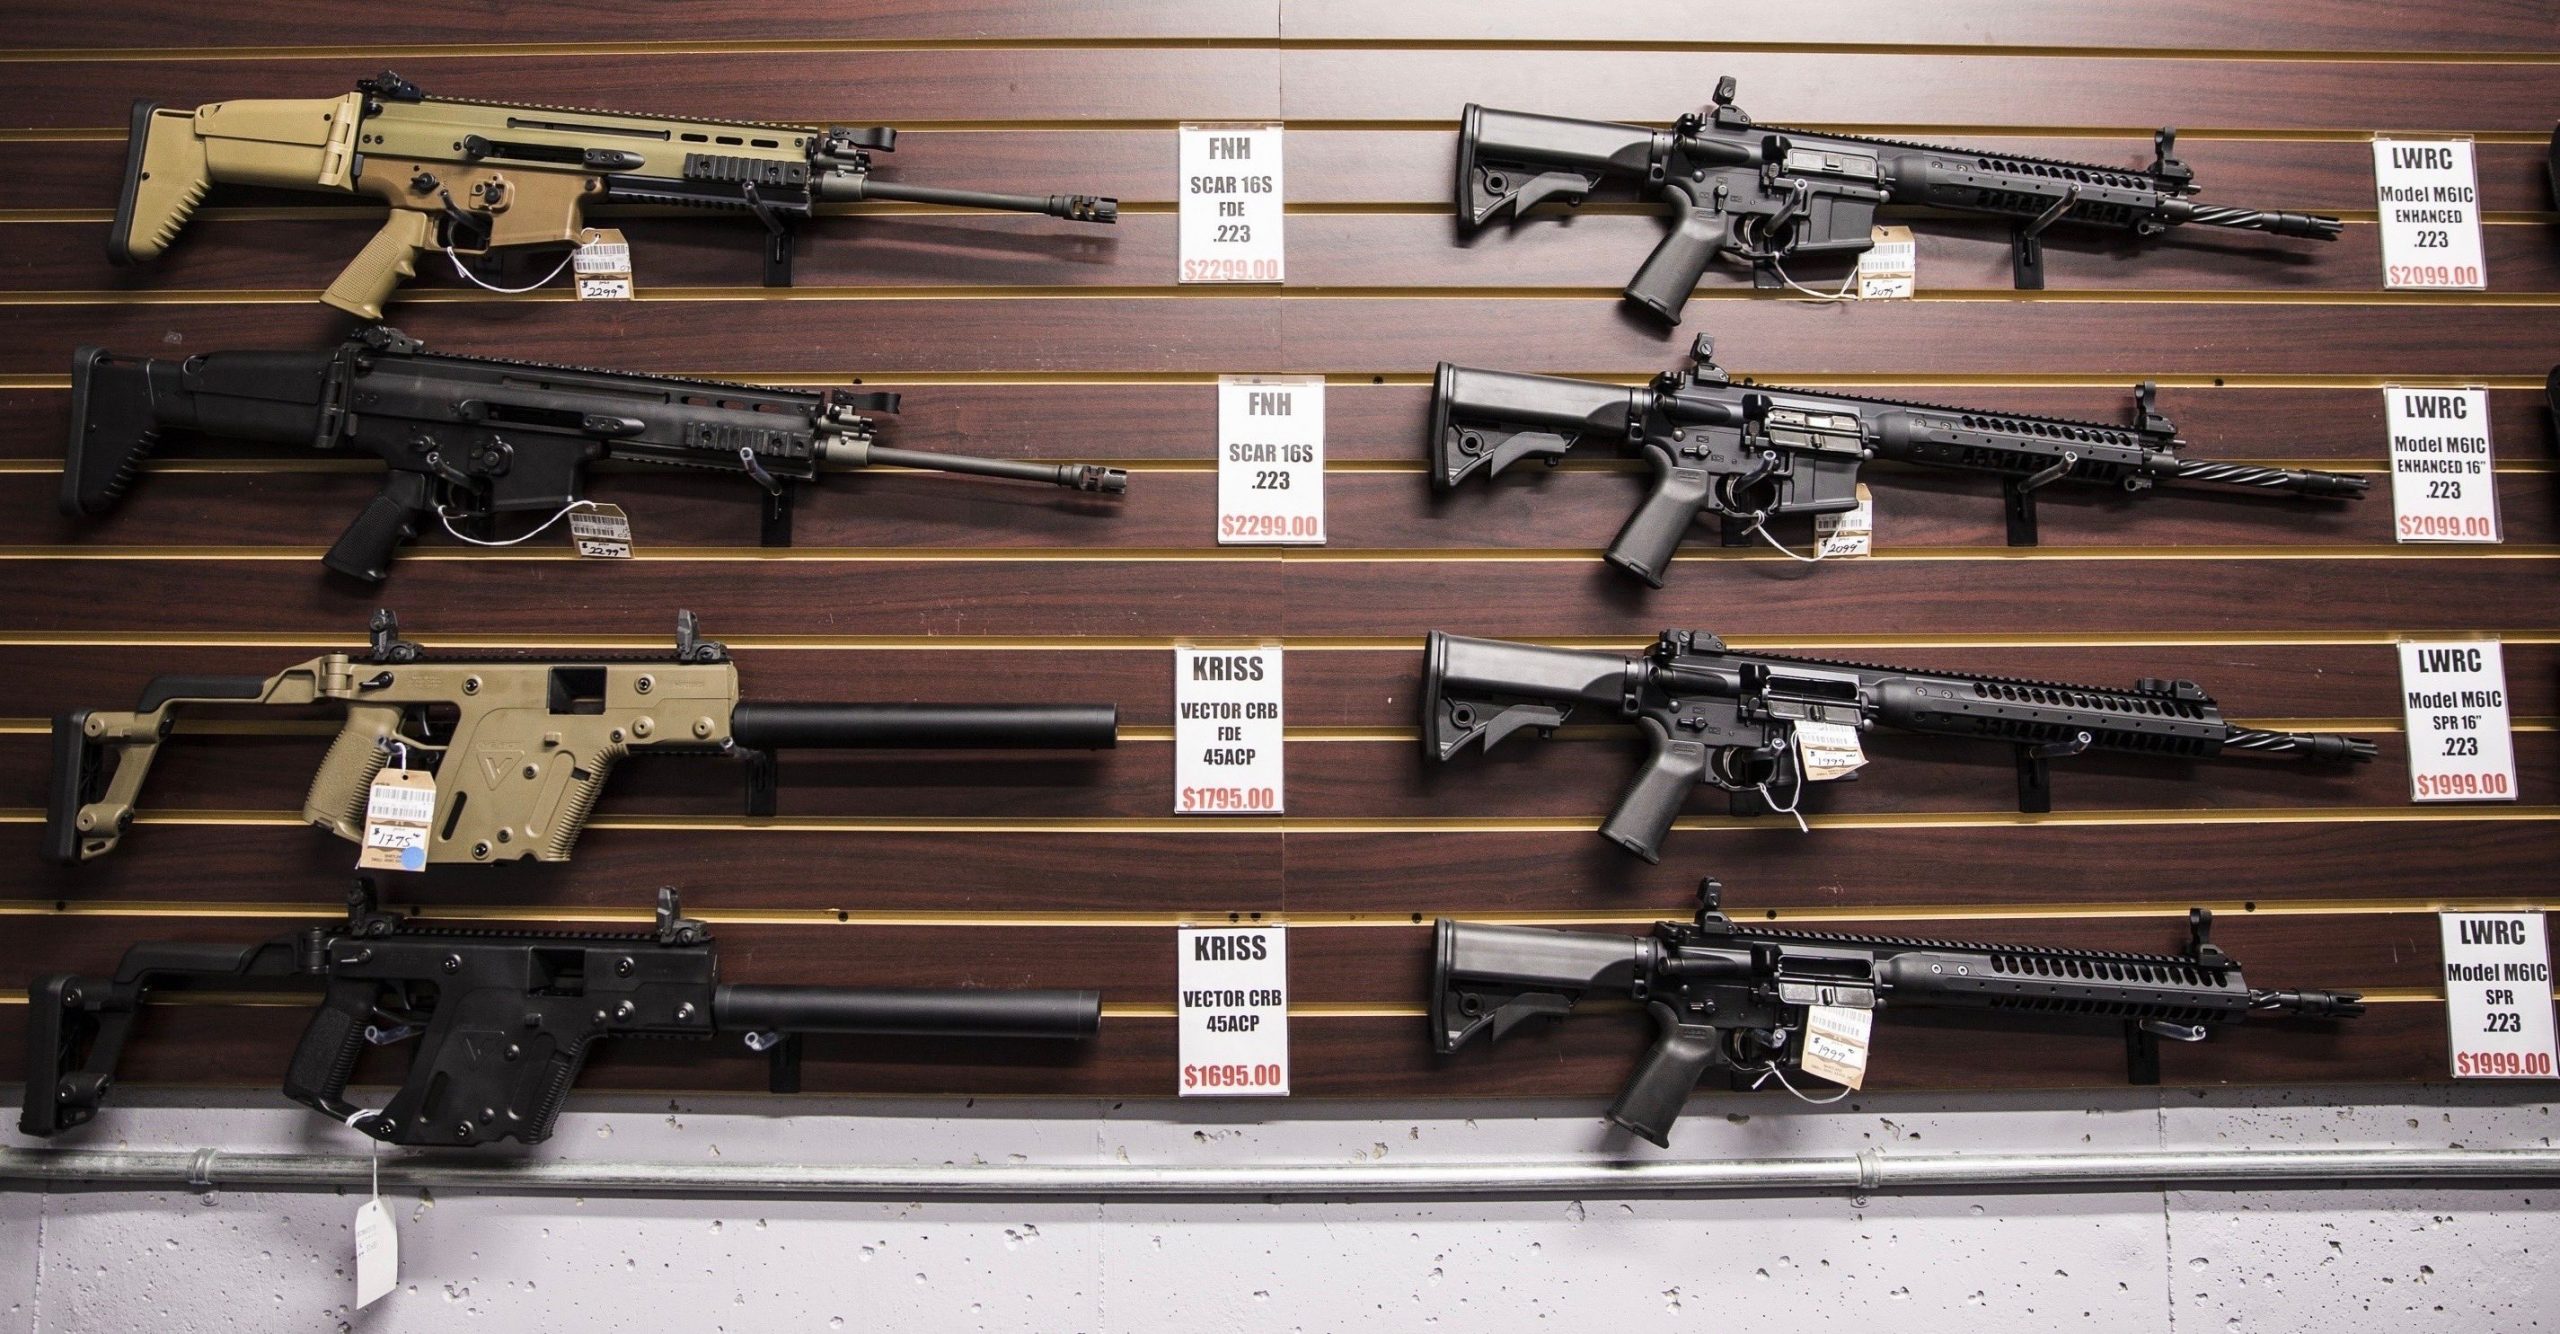 How the AR-15 became 'America's national gun' and loved by the NRA